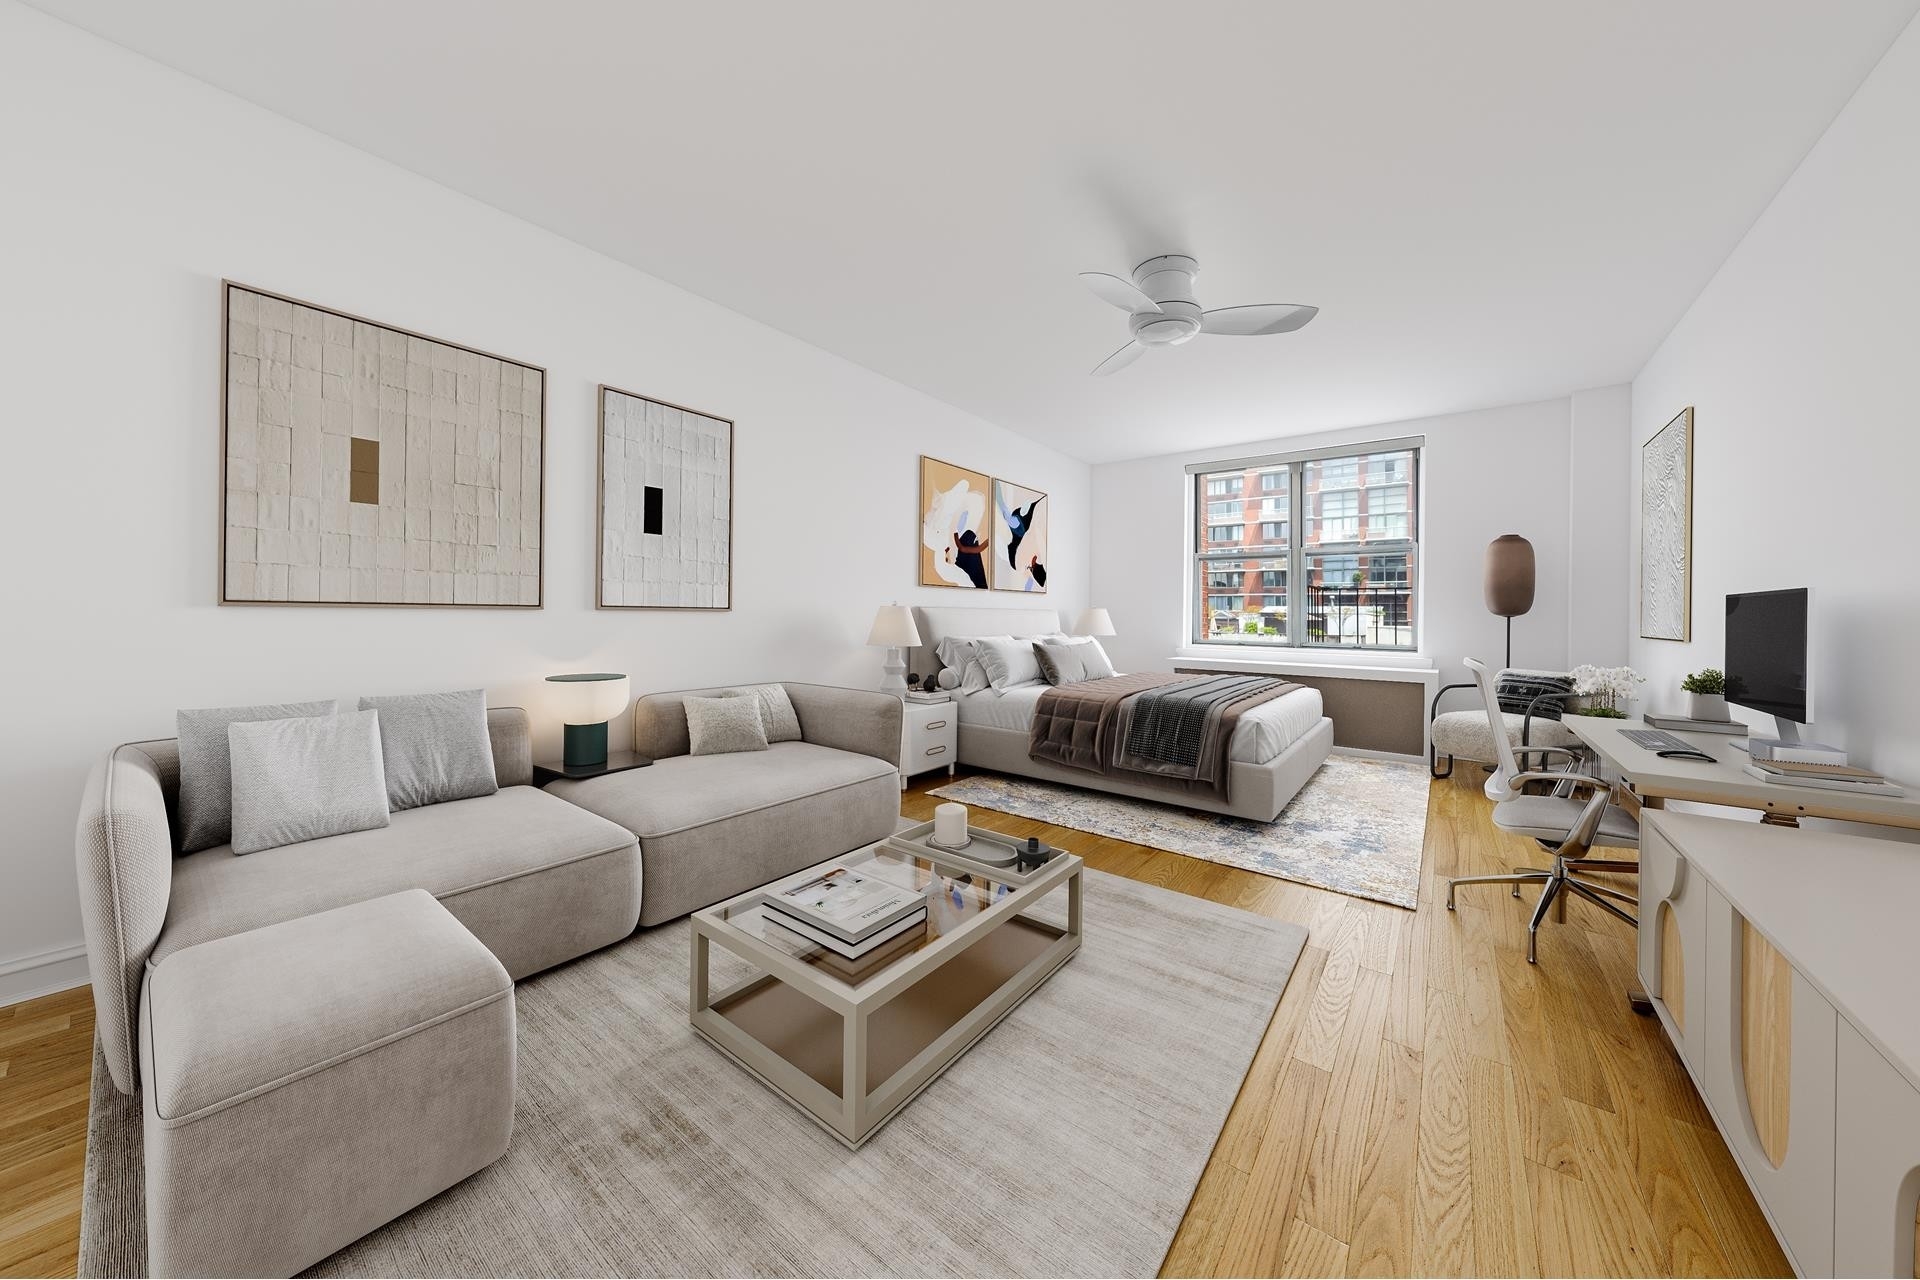 Co-op Properties for Sale at Norville House, 13 W 13TH ST, 5CN Greenwich Village, New York, New York 10011